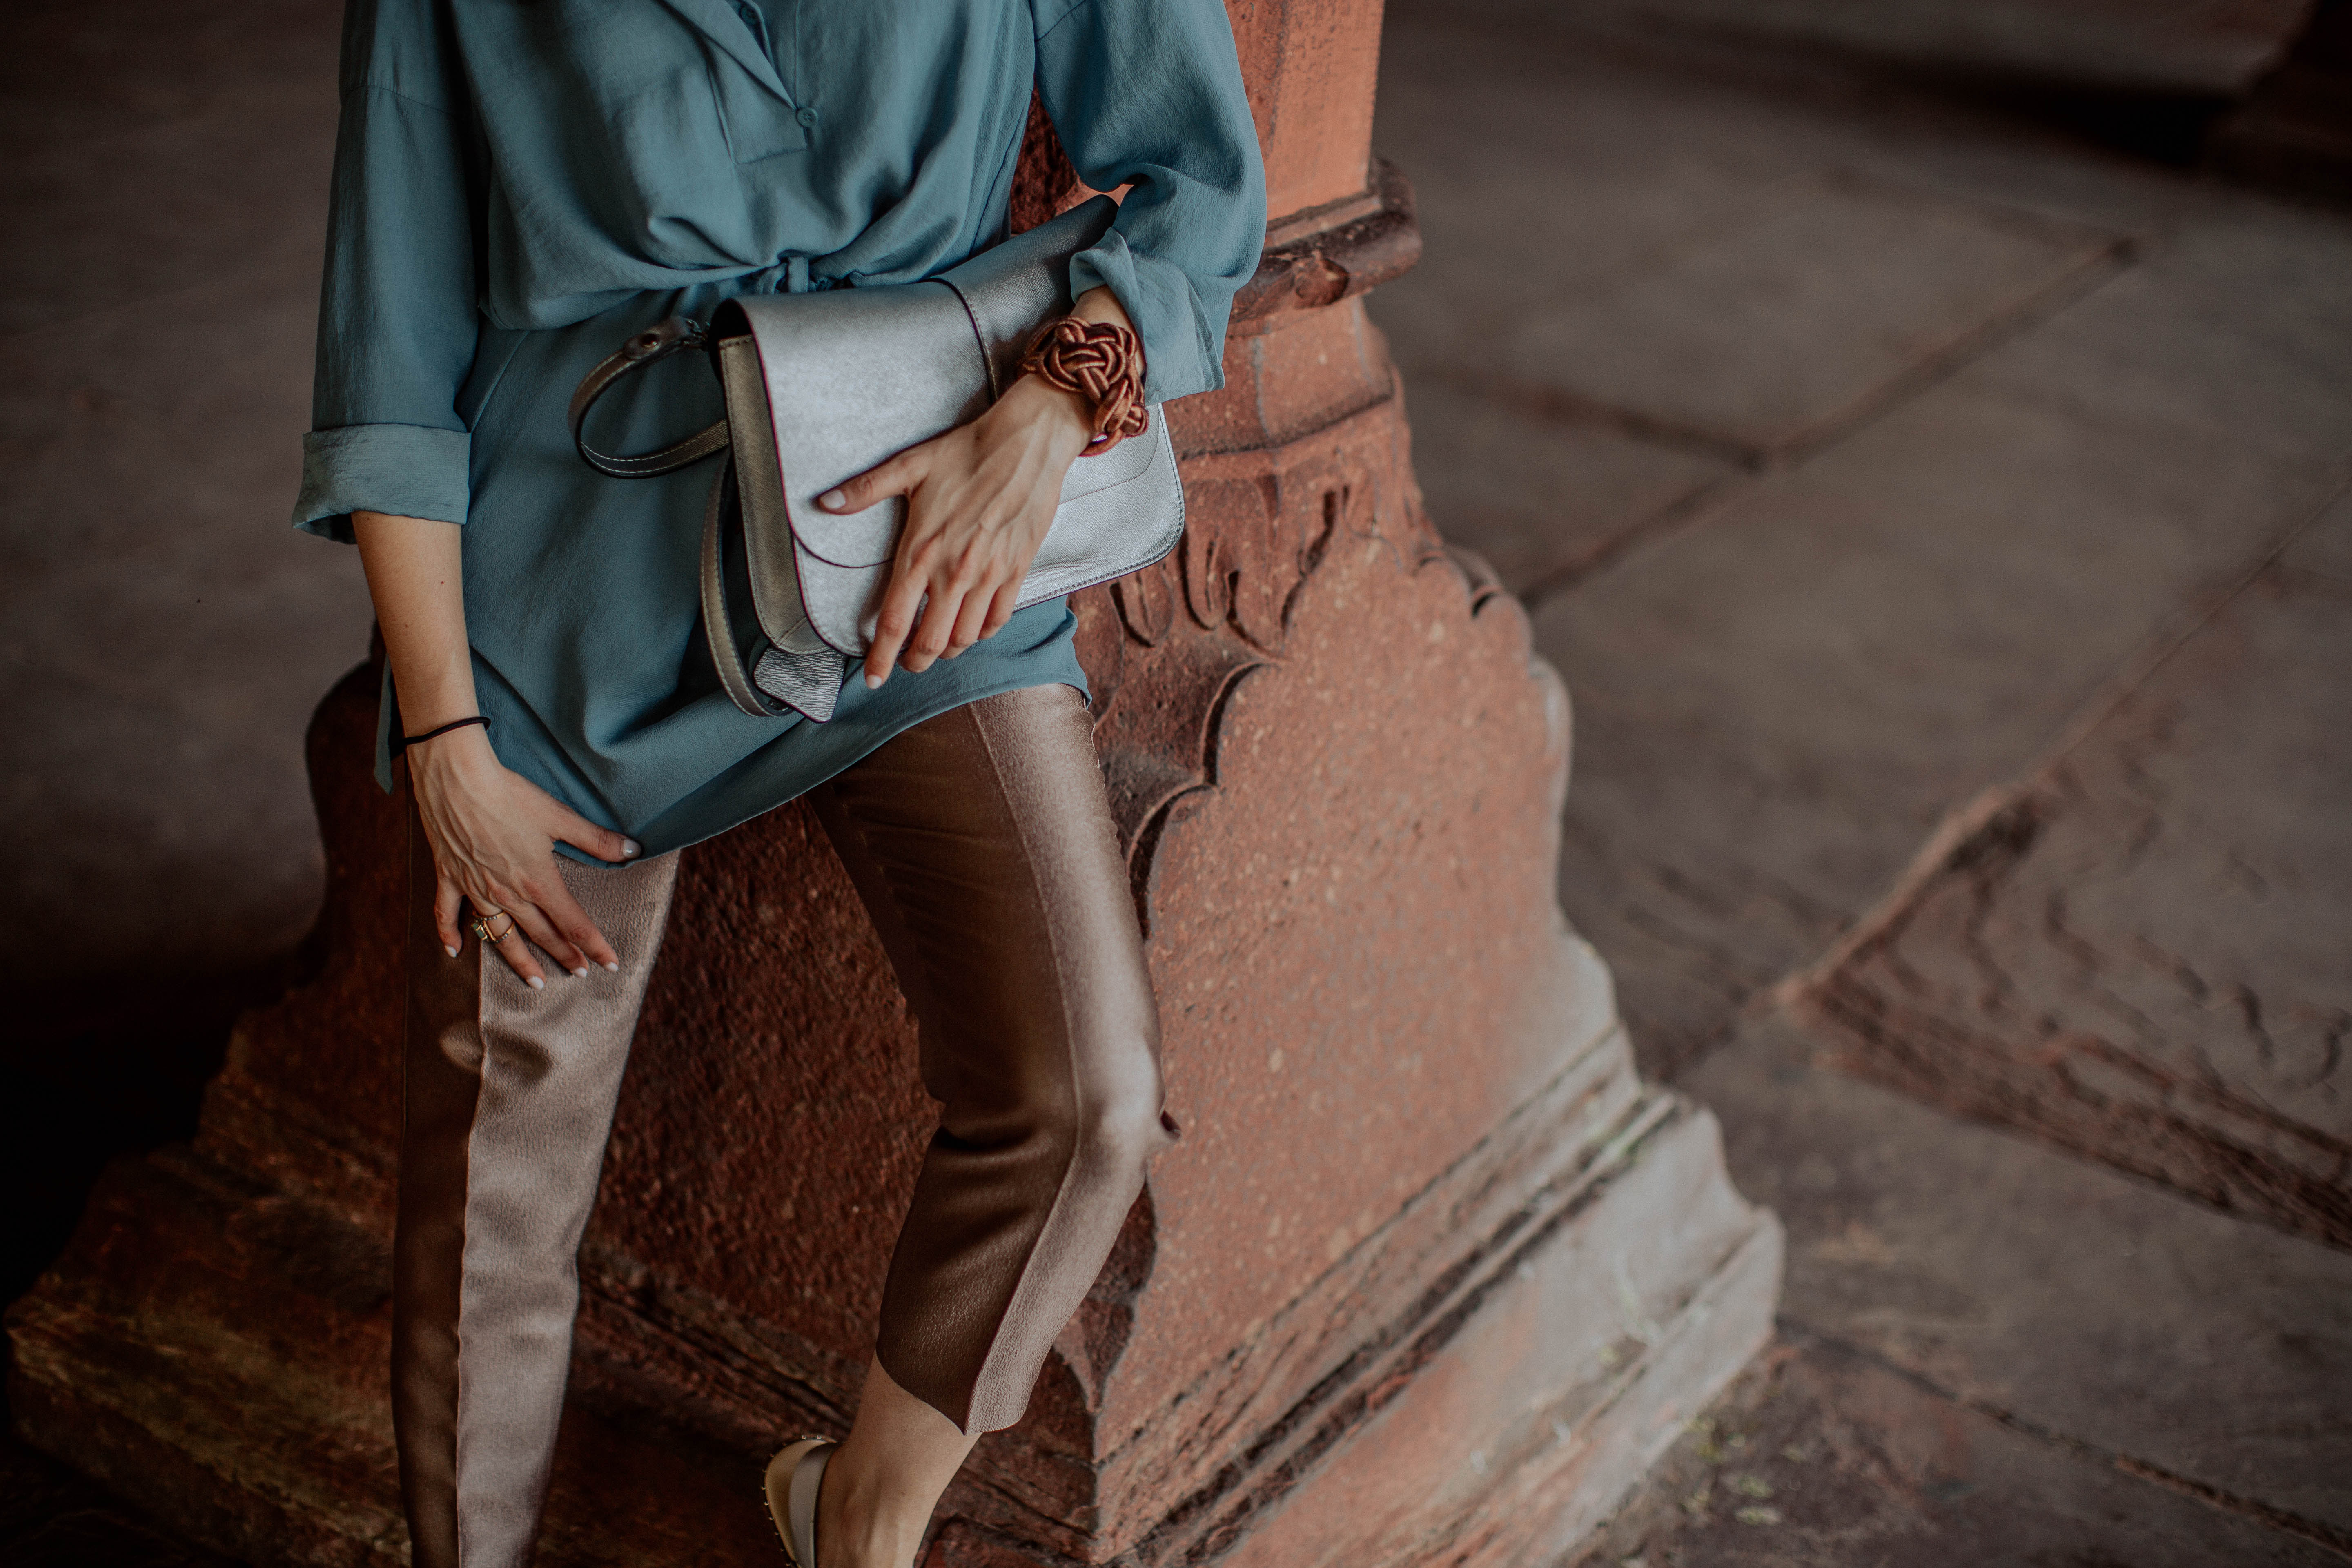 Yana Frigelis of NoMad Luxuries wearing metallic pants and a tunic in India and the lessons she learned traveling solo